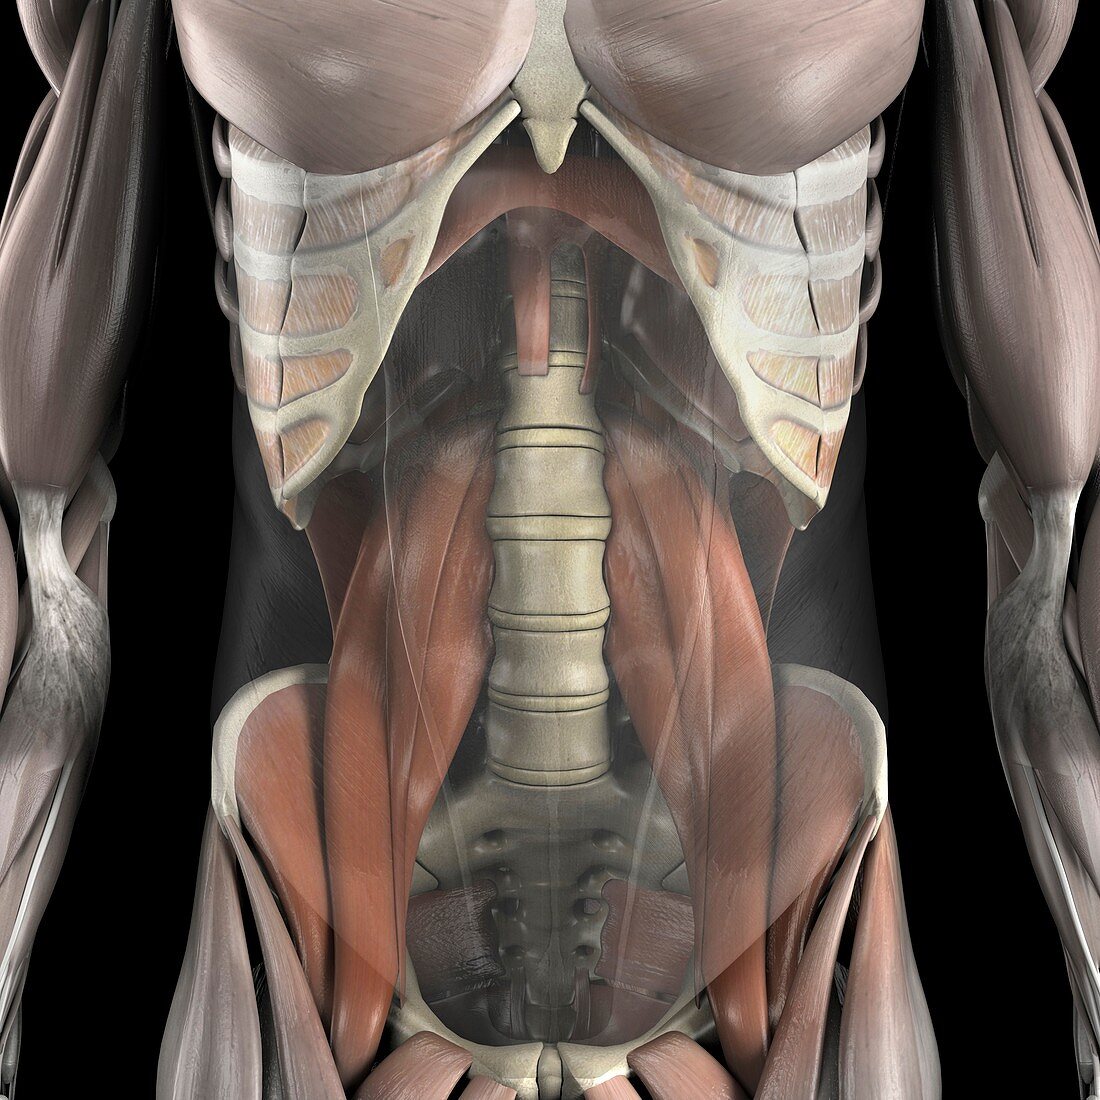 The Psoas Muscles, artwork